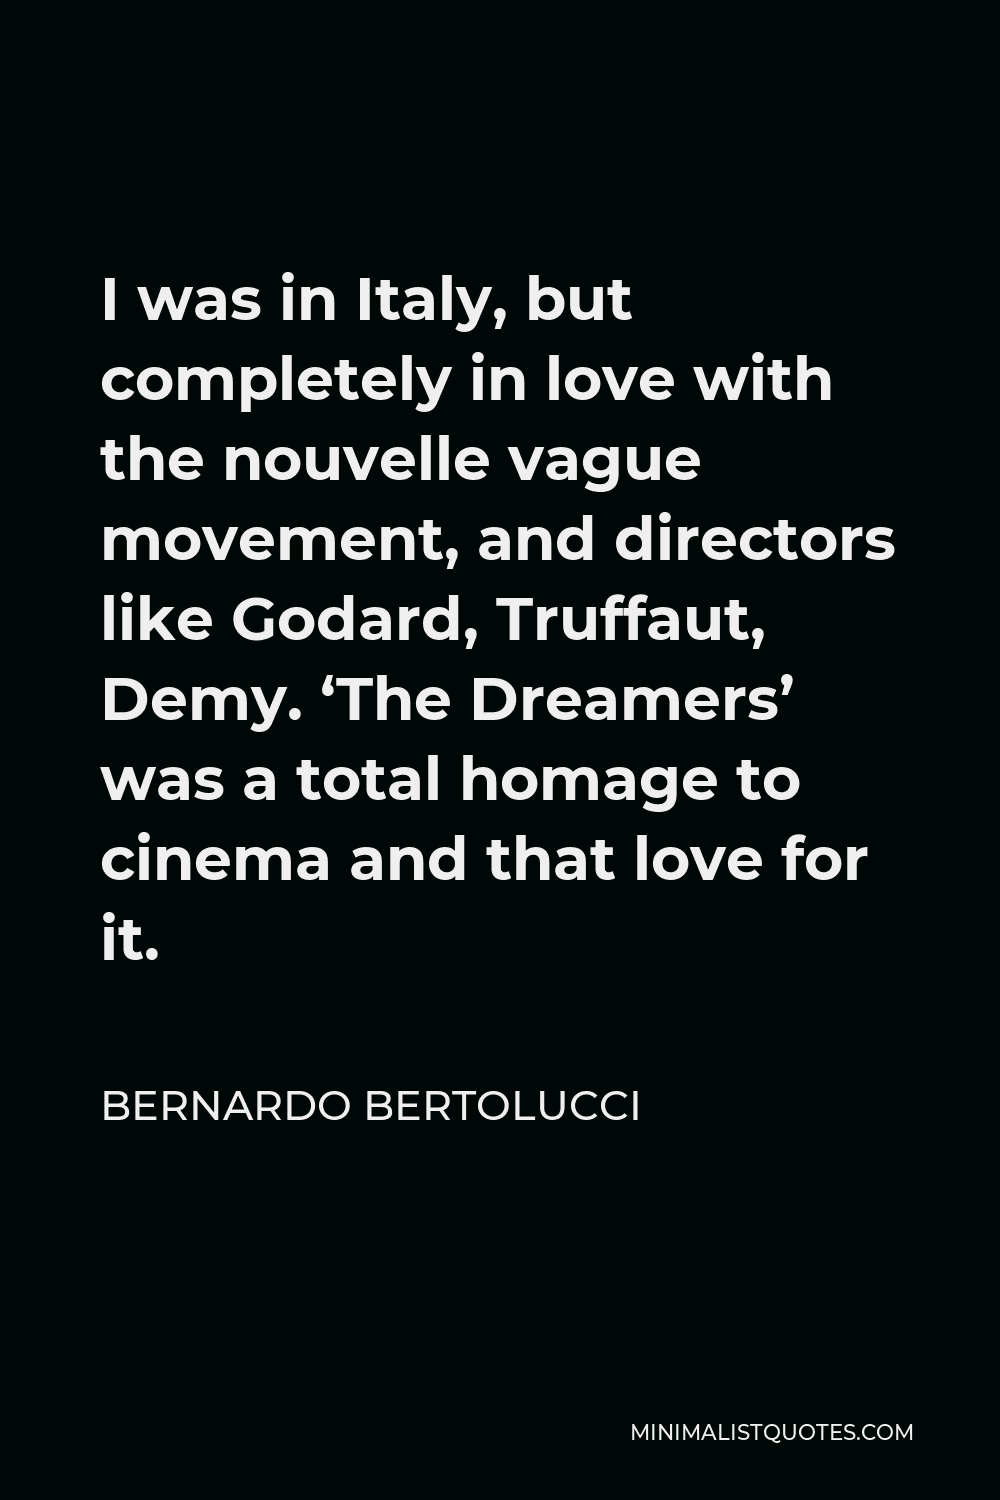 Bernardo Bertolucci Quote - I was in Italy, but completely in love with the nouvelle vague movement, and directors like Godard, Truffaut, Demy. ‘The Dreamers’ was a total homage to cinema and that love for it.